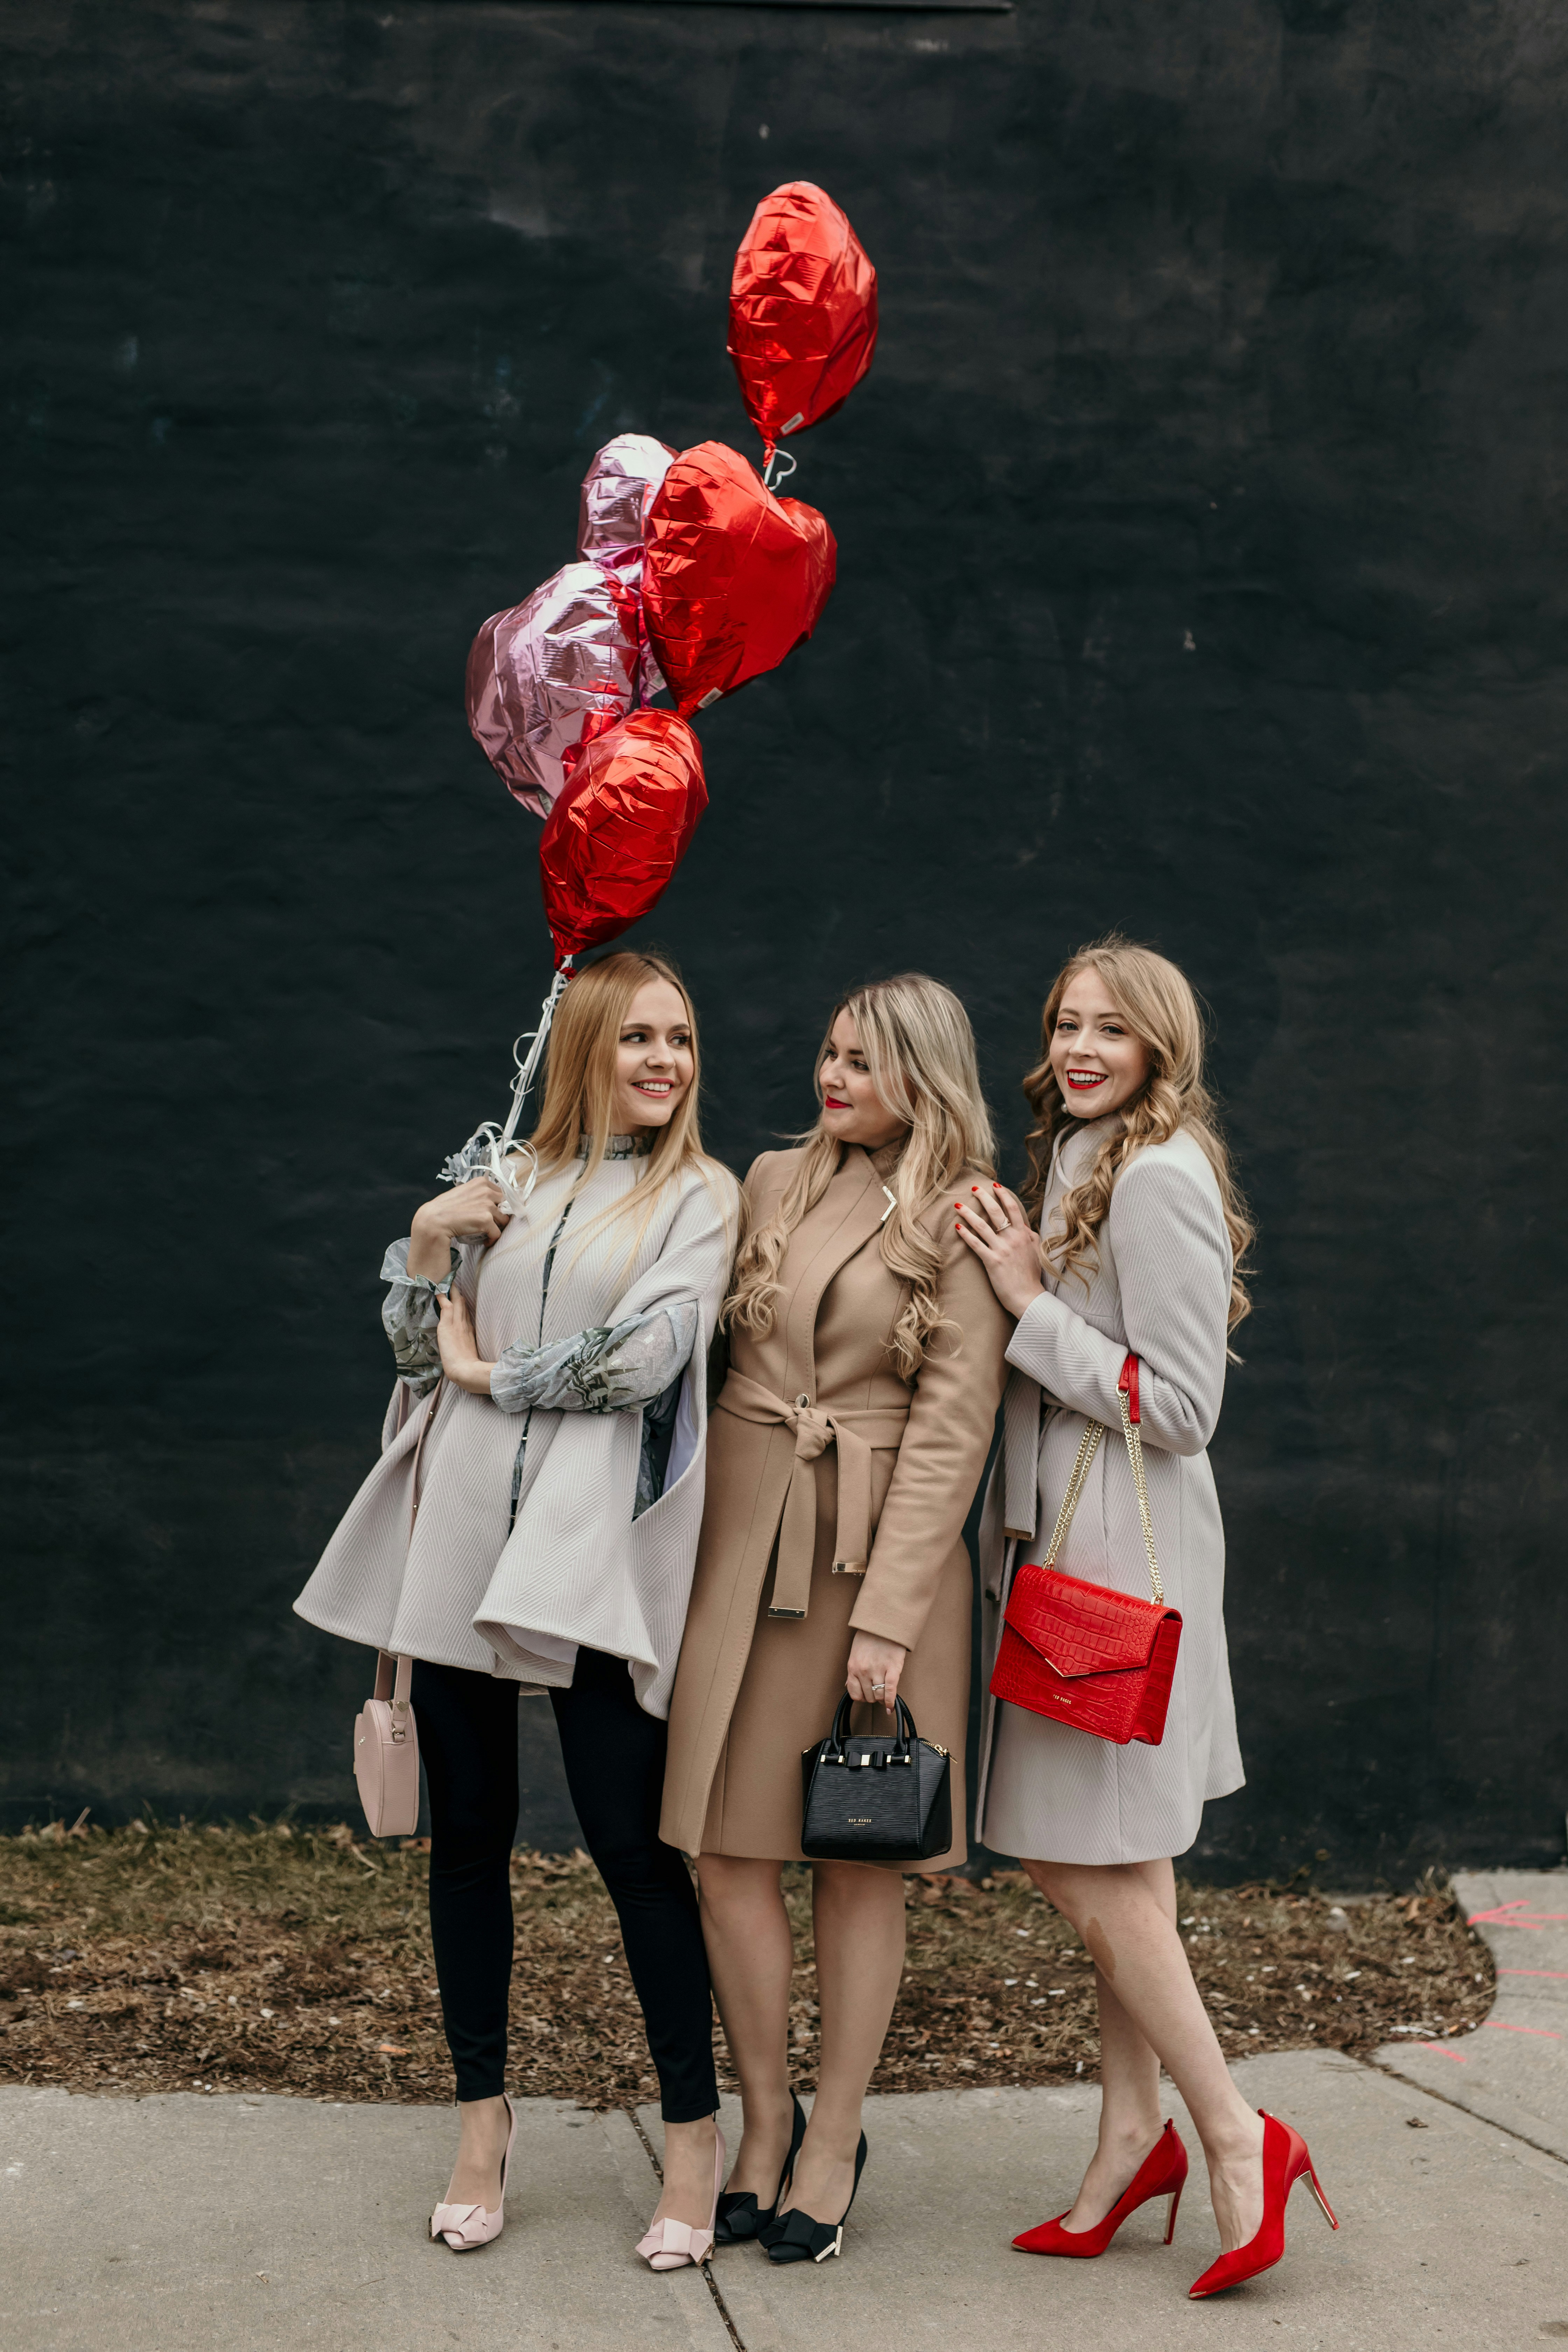 Ted Baker Galentine's Day Looks: wool coats and capes, heart handbags, pops of red and elegant dresses.